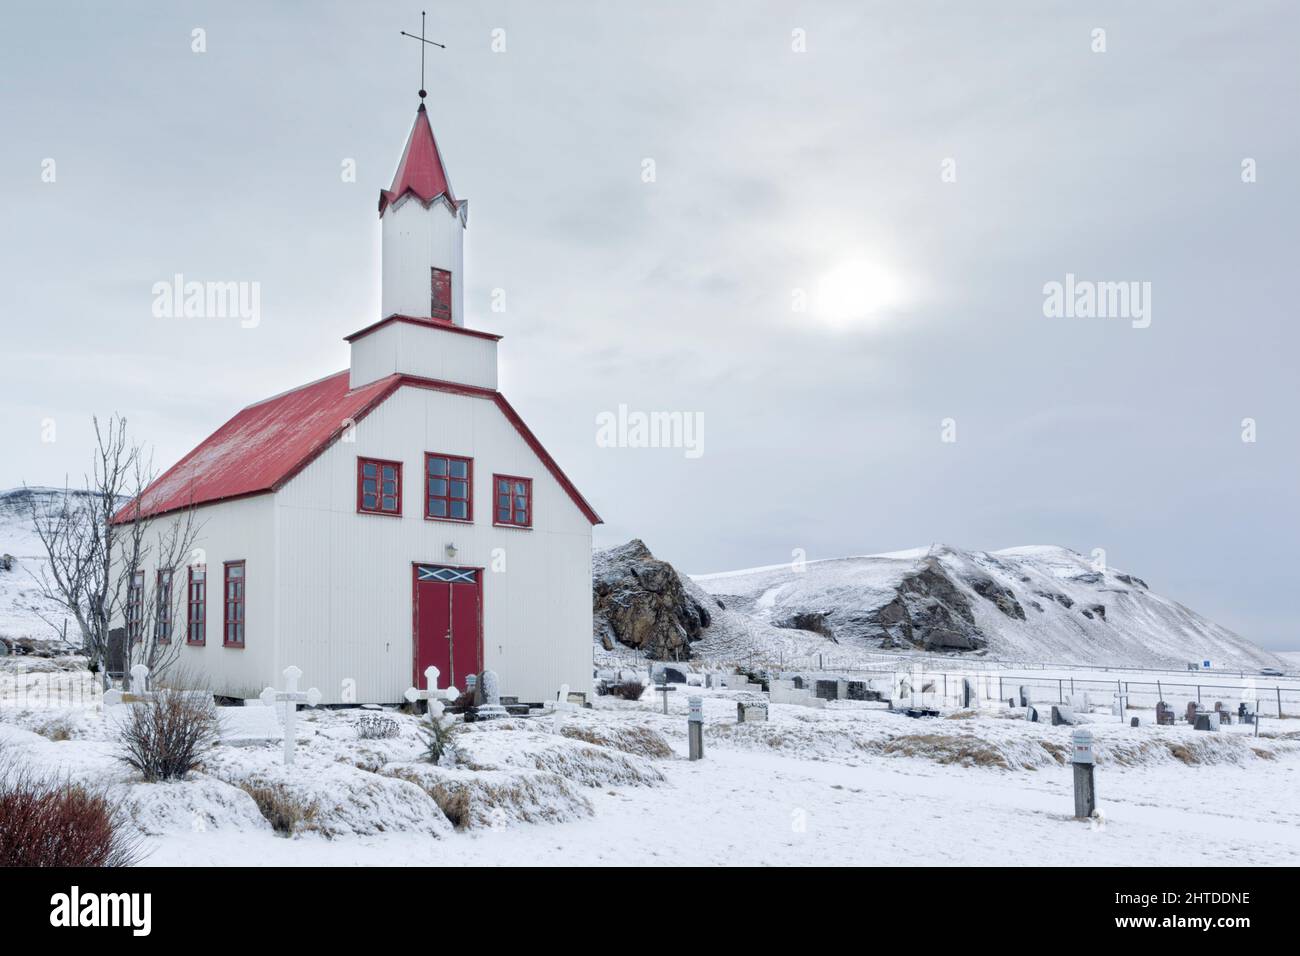 Rural Icelandic church surrounded by snow at Skeiðflatarkirkja in the region of Mýrdalshreppur on the southern rim of Iceland Stock Photo